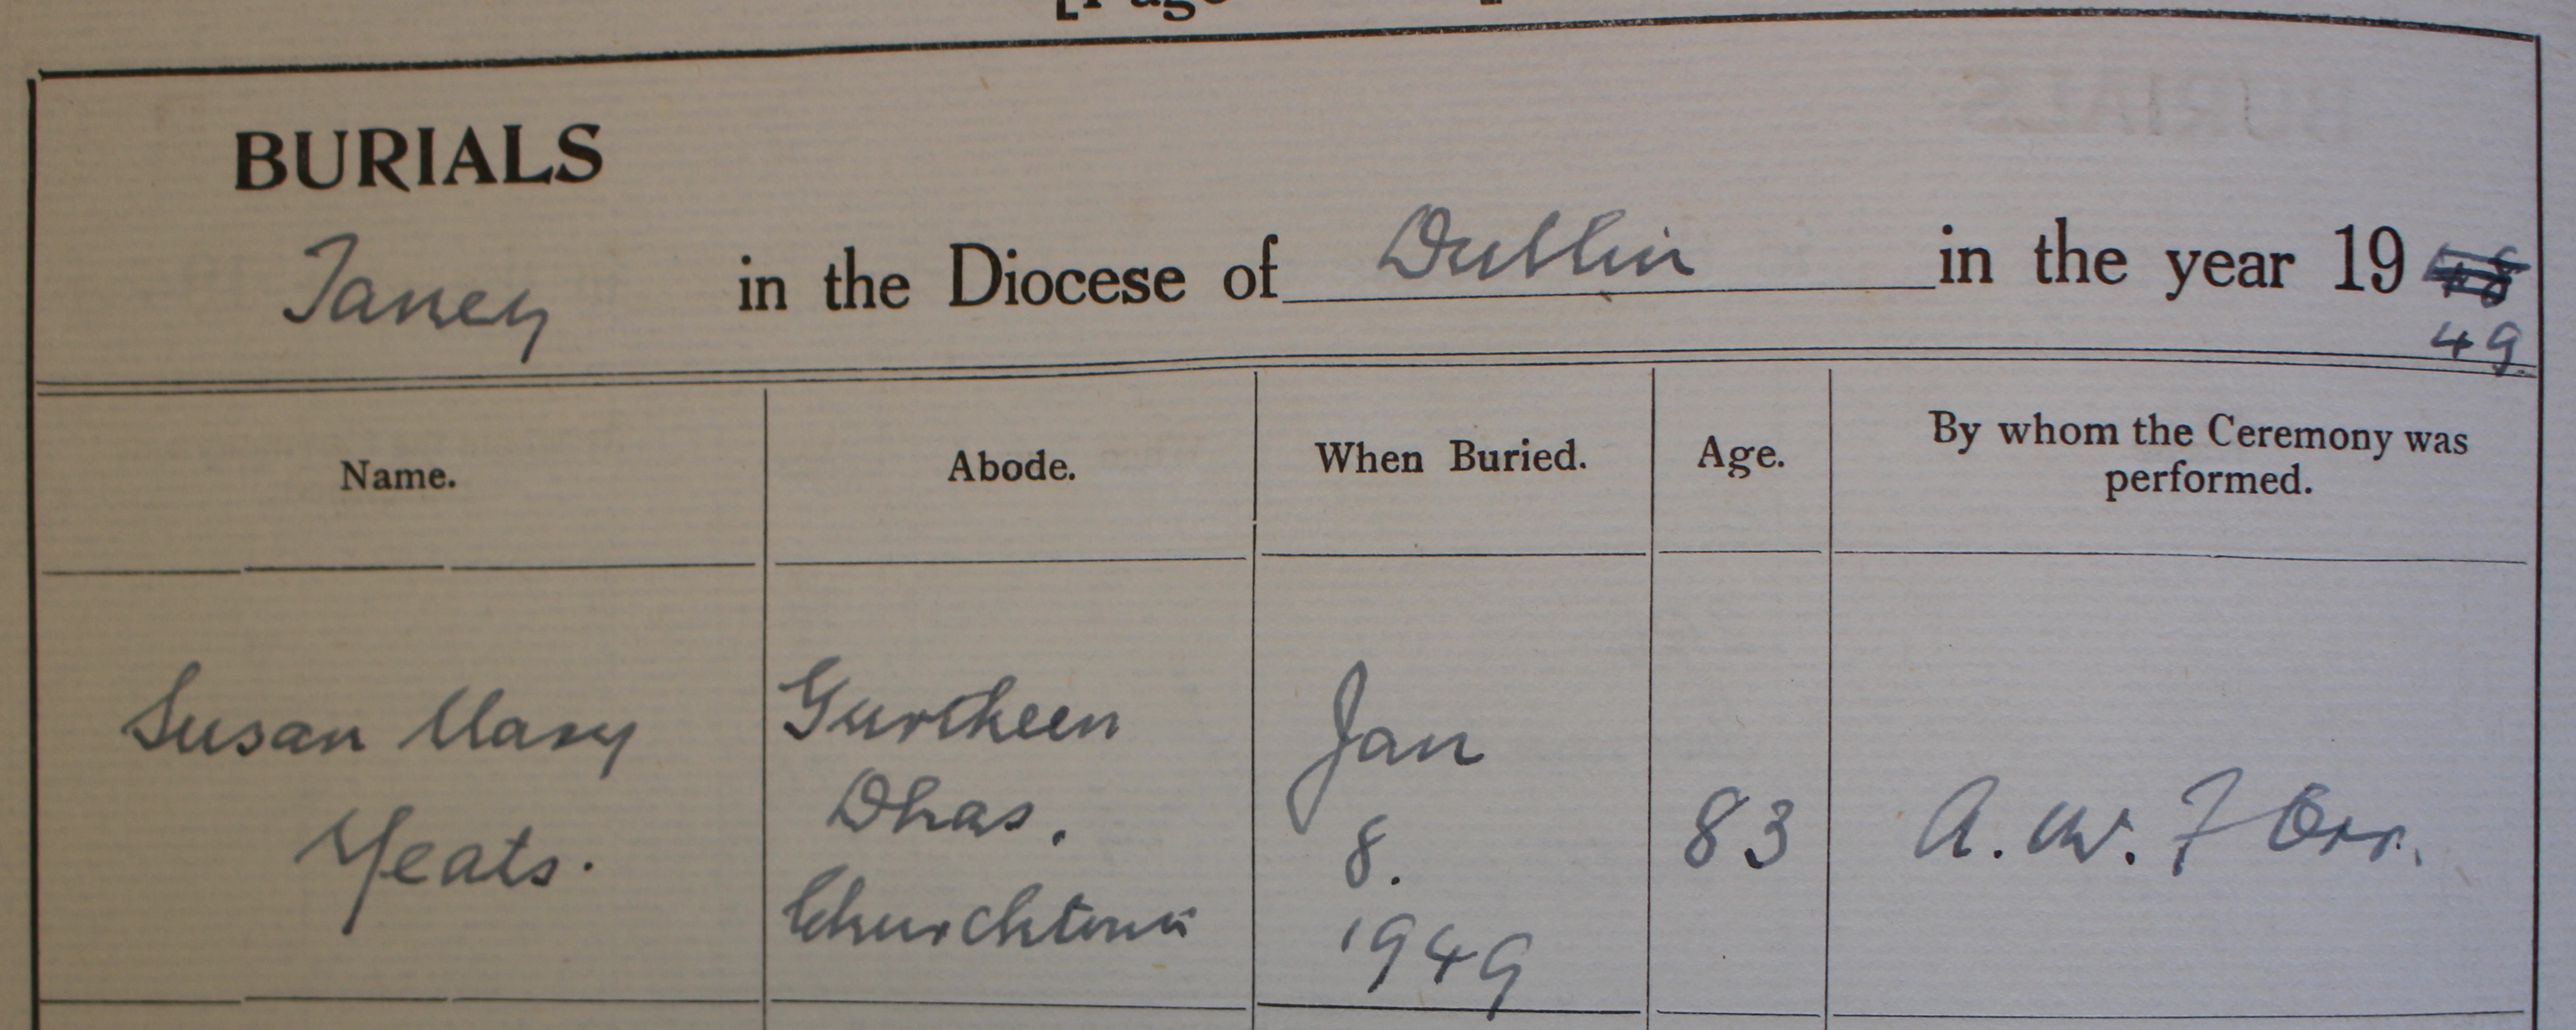 The burial record of Lily Yeats which appears in the same book as that of her sister (RCB Library P609.04.6).